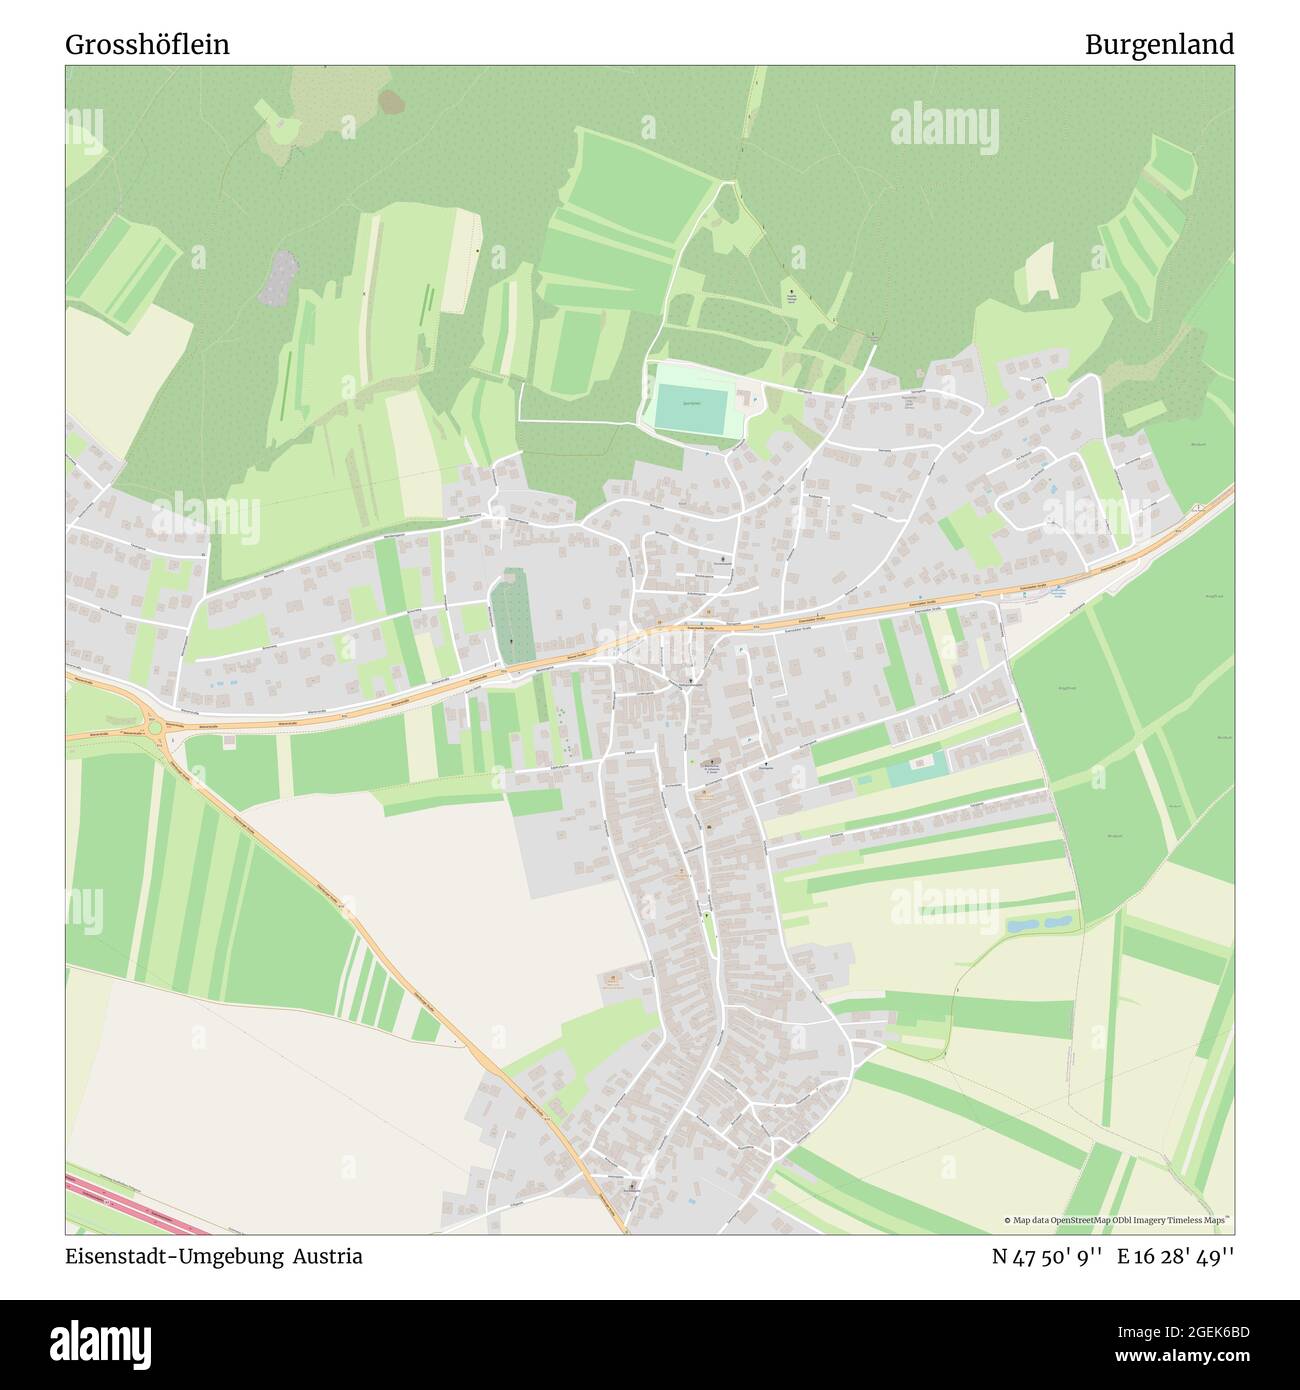 Grosshöflein, Eisenstadt-Umgebung, Austria, Burgenland, N 47 50' 9'', E 16 28' 49'', map, Timeless Map published in 2021. Travelers, explorers and adventurers like Florence Nightingale, David Livingstone, Ernest Shackleton, Lewis and Clark and Sherlock Holmes relied on maps to plan travels to the world's most remote corners, Timeless Maps is mapping most locations on the globe, showing the achievement of great dreams Stock Photo